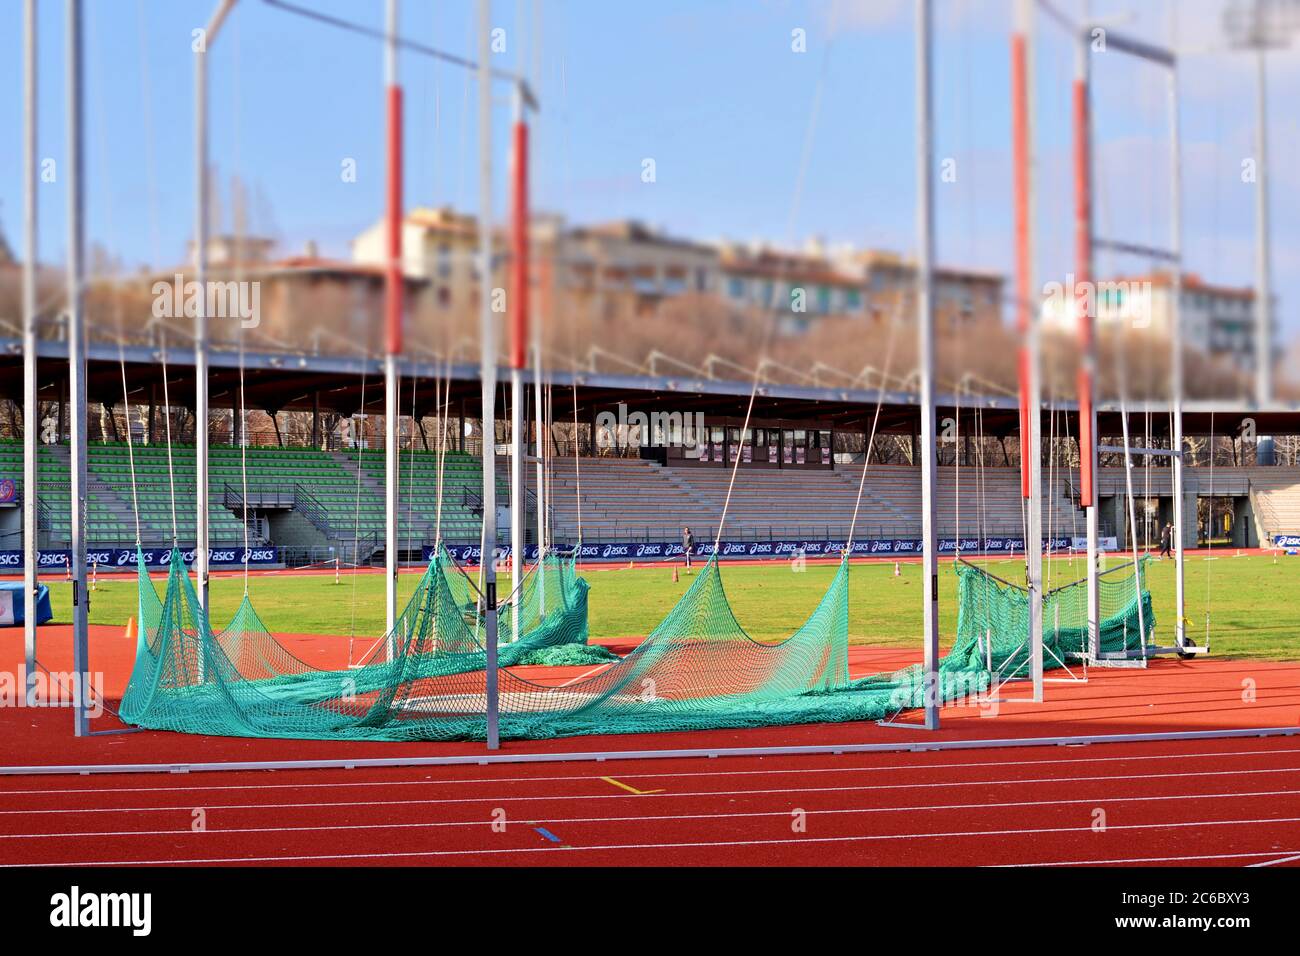 view of the launch pad in the Asics athletics stadium in Florence Marathon Stadium dedicated to Luigi Ridolfi in the city of Florence in Italy Stock Photo